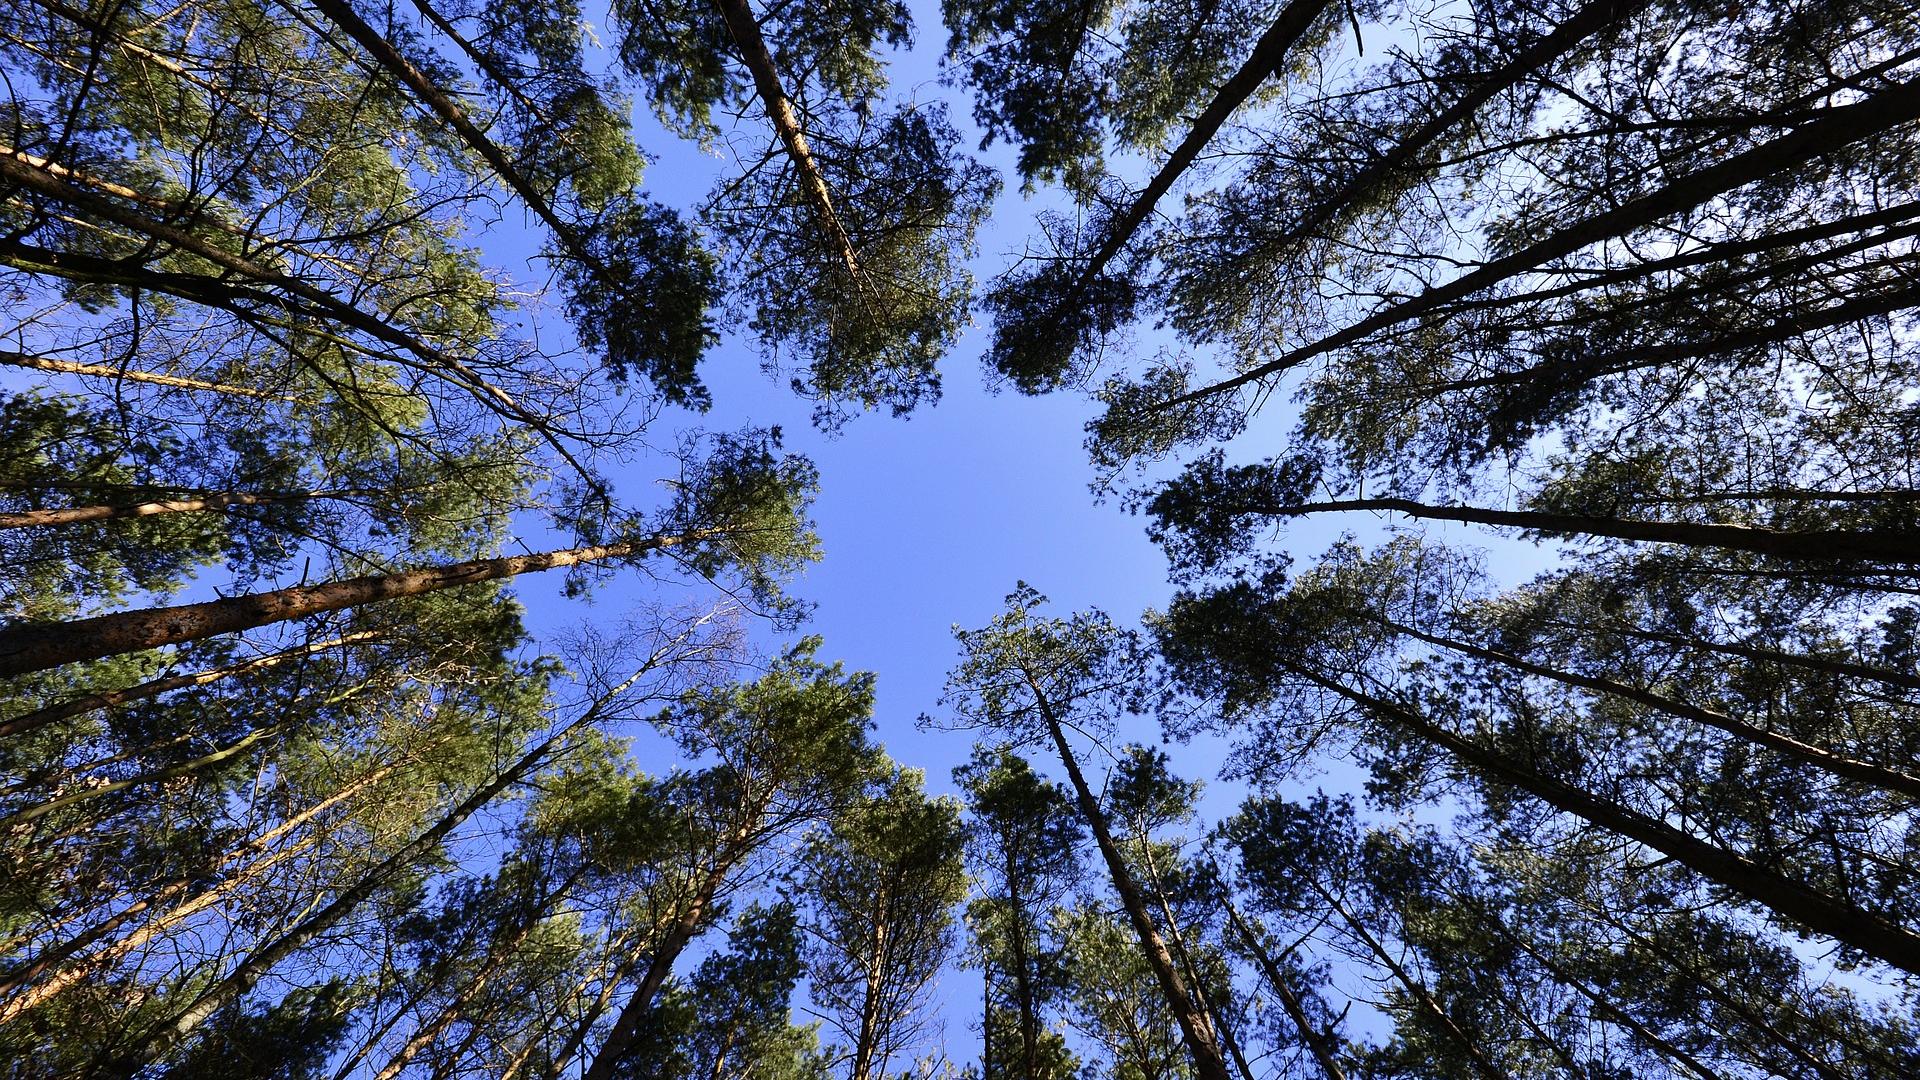 Trees and sky seen from below